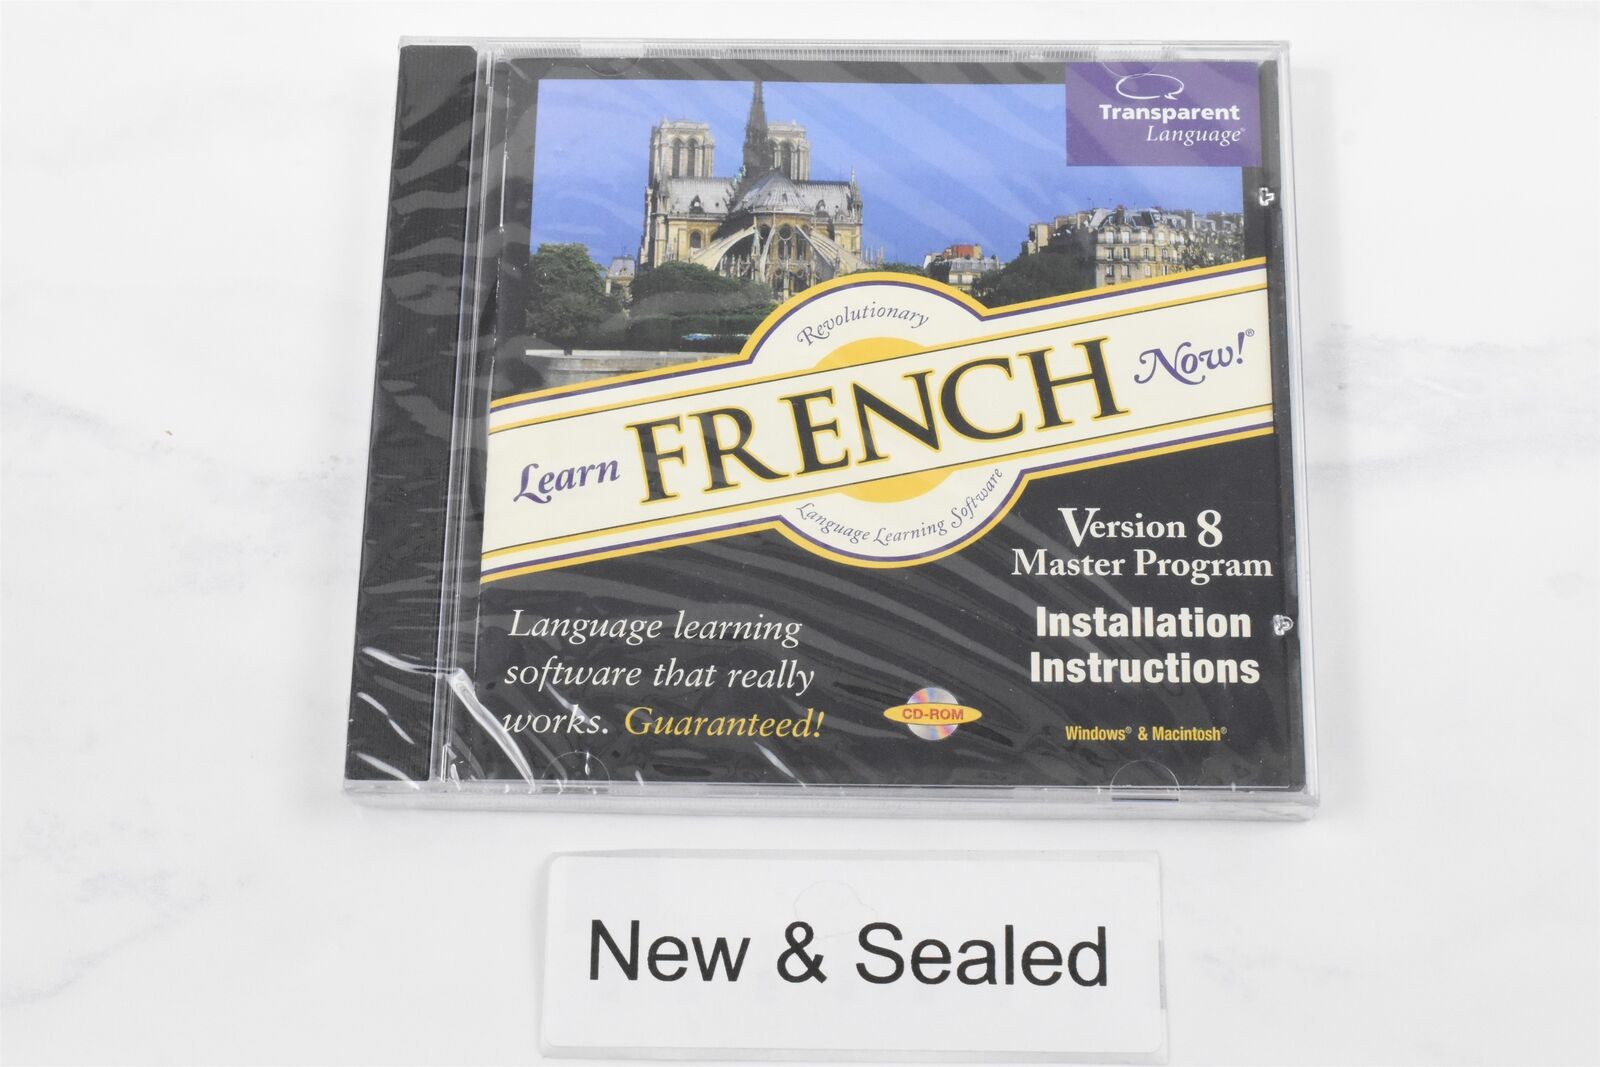 Learn French Now Version 8 Software CD-ROM for Windows & Mac - New